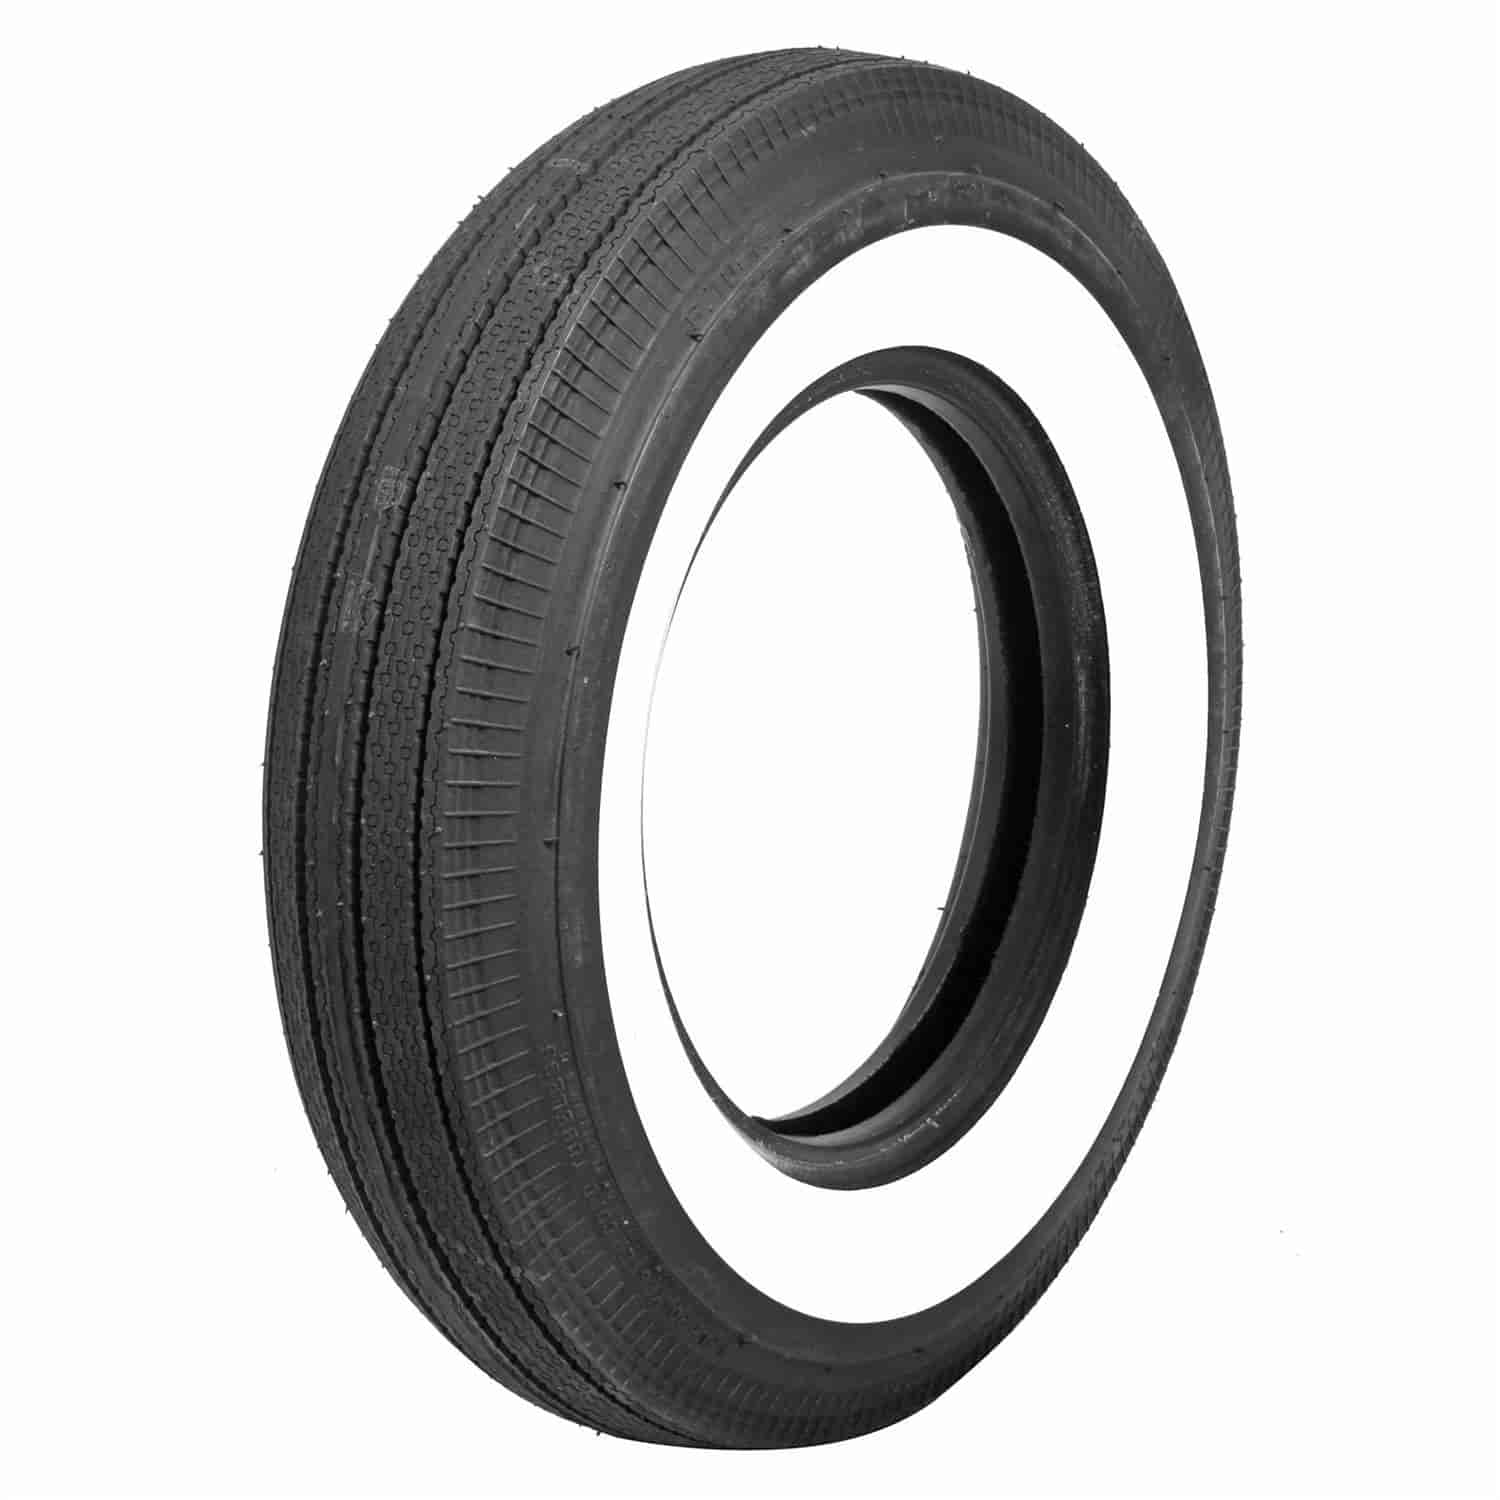 Coker Classic Wide Whitewall Bias Ply Tire 670-15